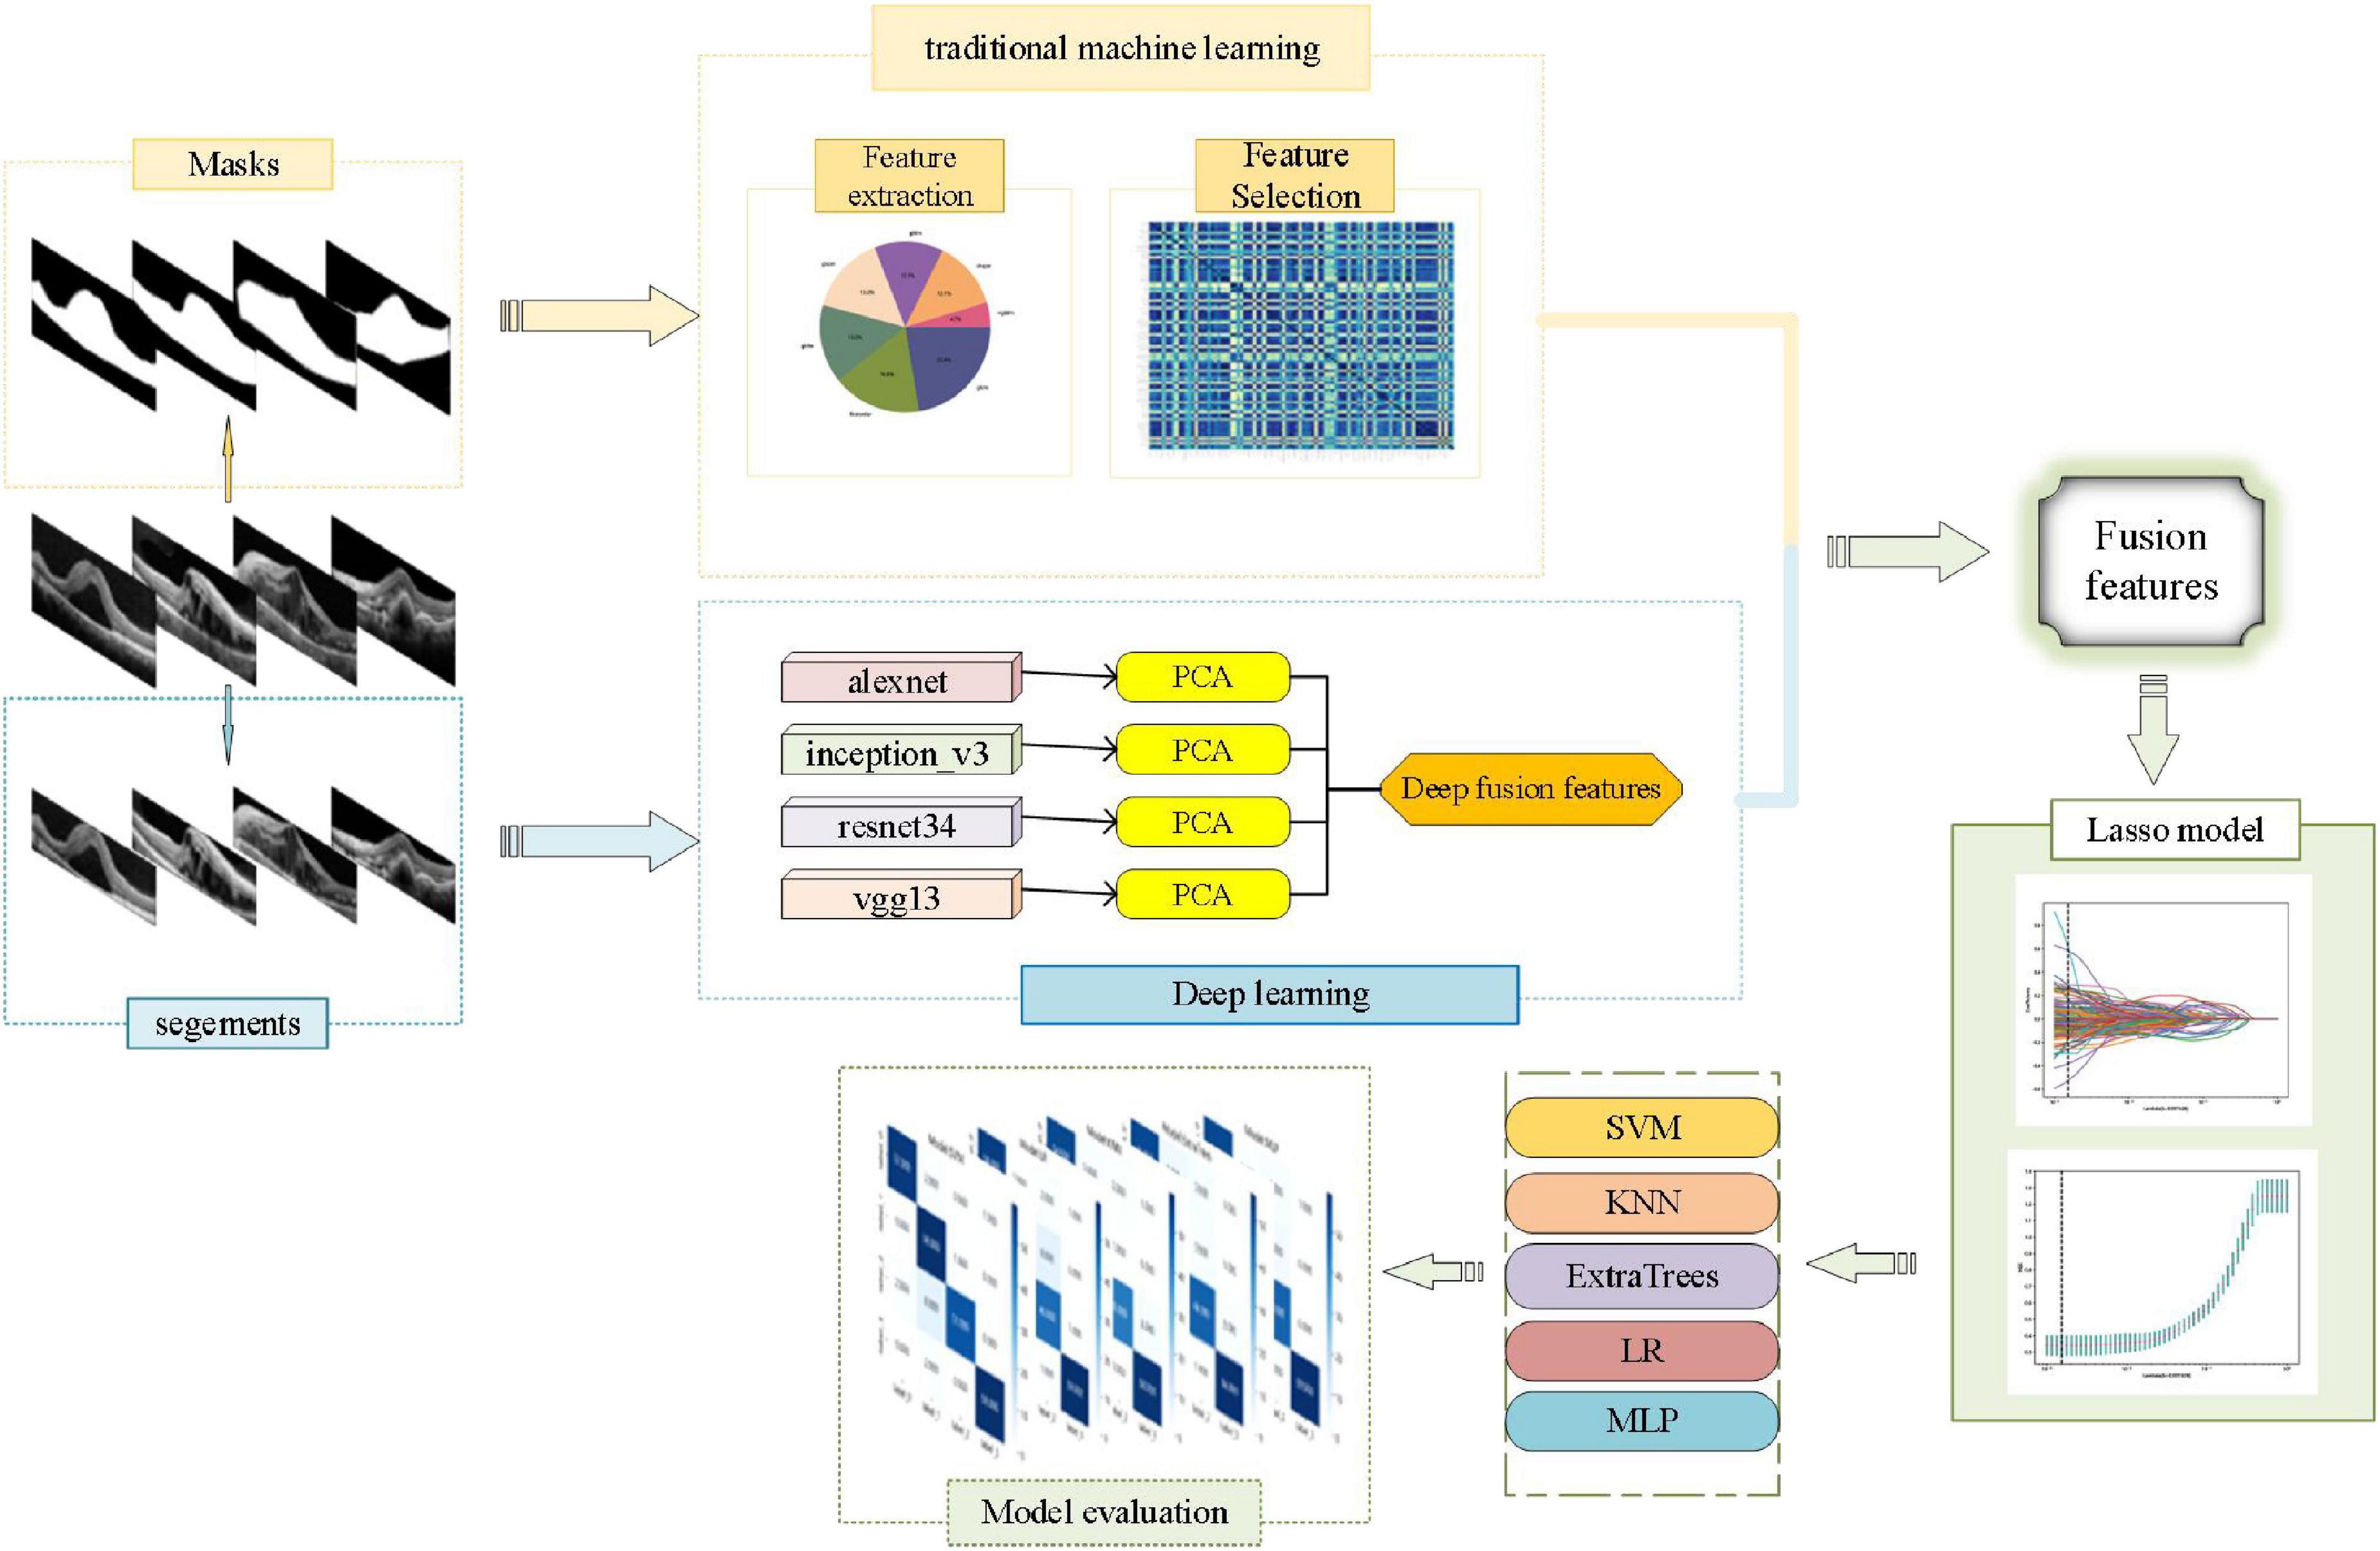 Artificial intelligence method based on multi-feature fusion for automatic macular edema (ME) classification on spectral-domain optical coherence tomography (SD-OCT) images